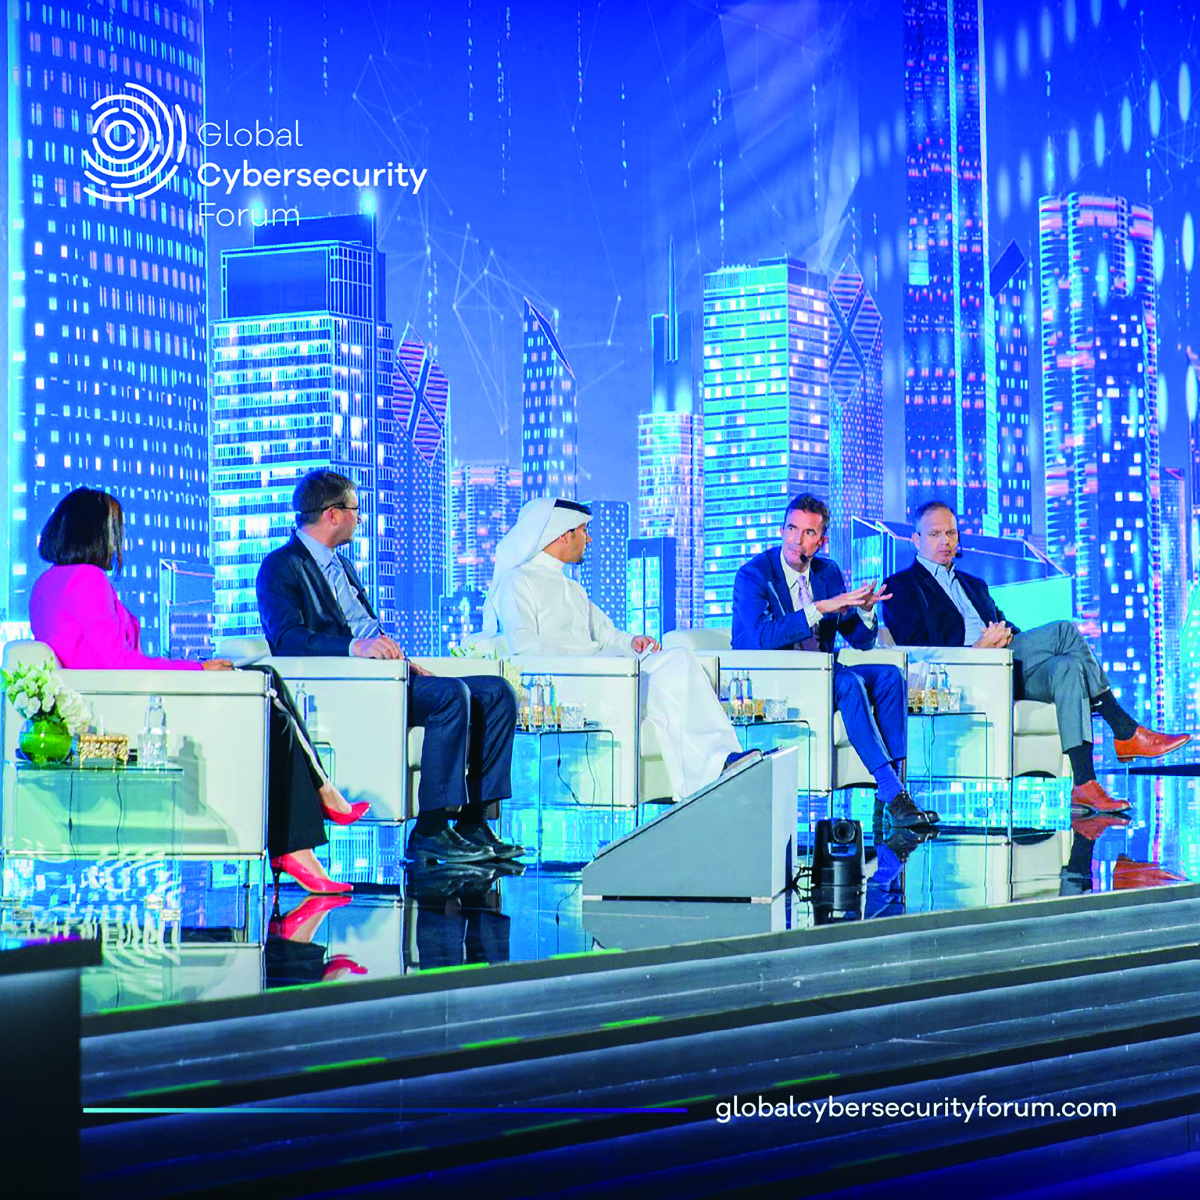 Surveying the cybersecurity scene | arab news p4 keeping the lights on focused on how we can protect global energy supply chains from cyber threats. gcf